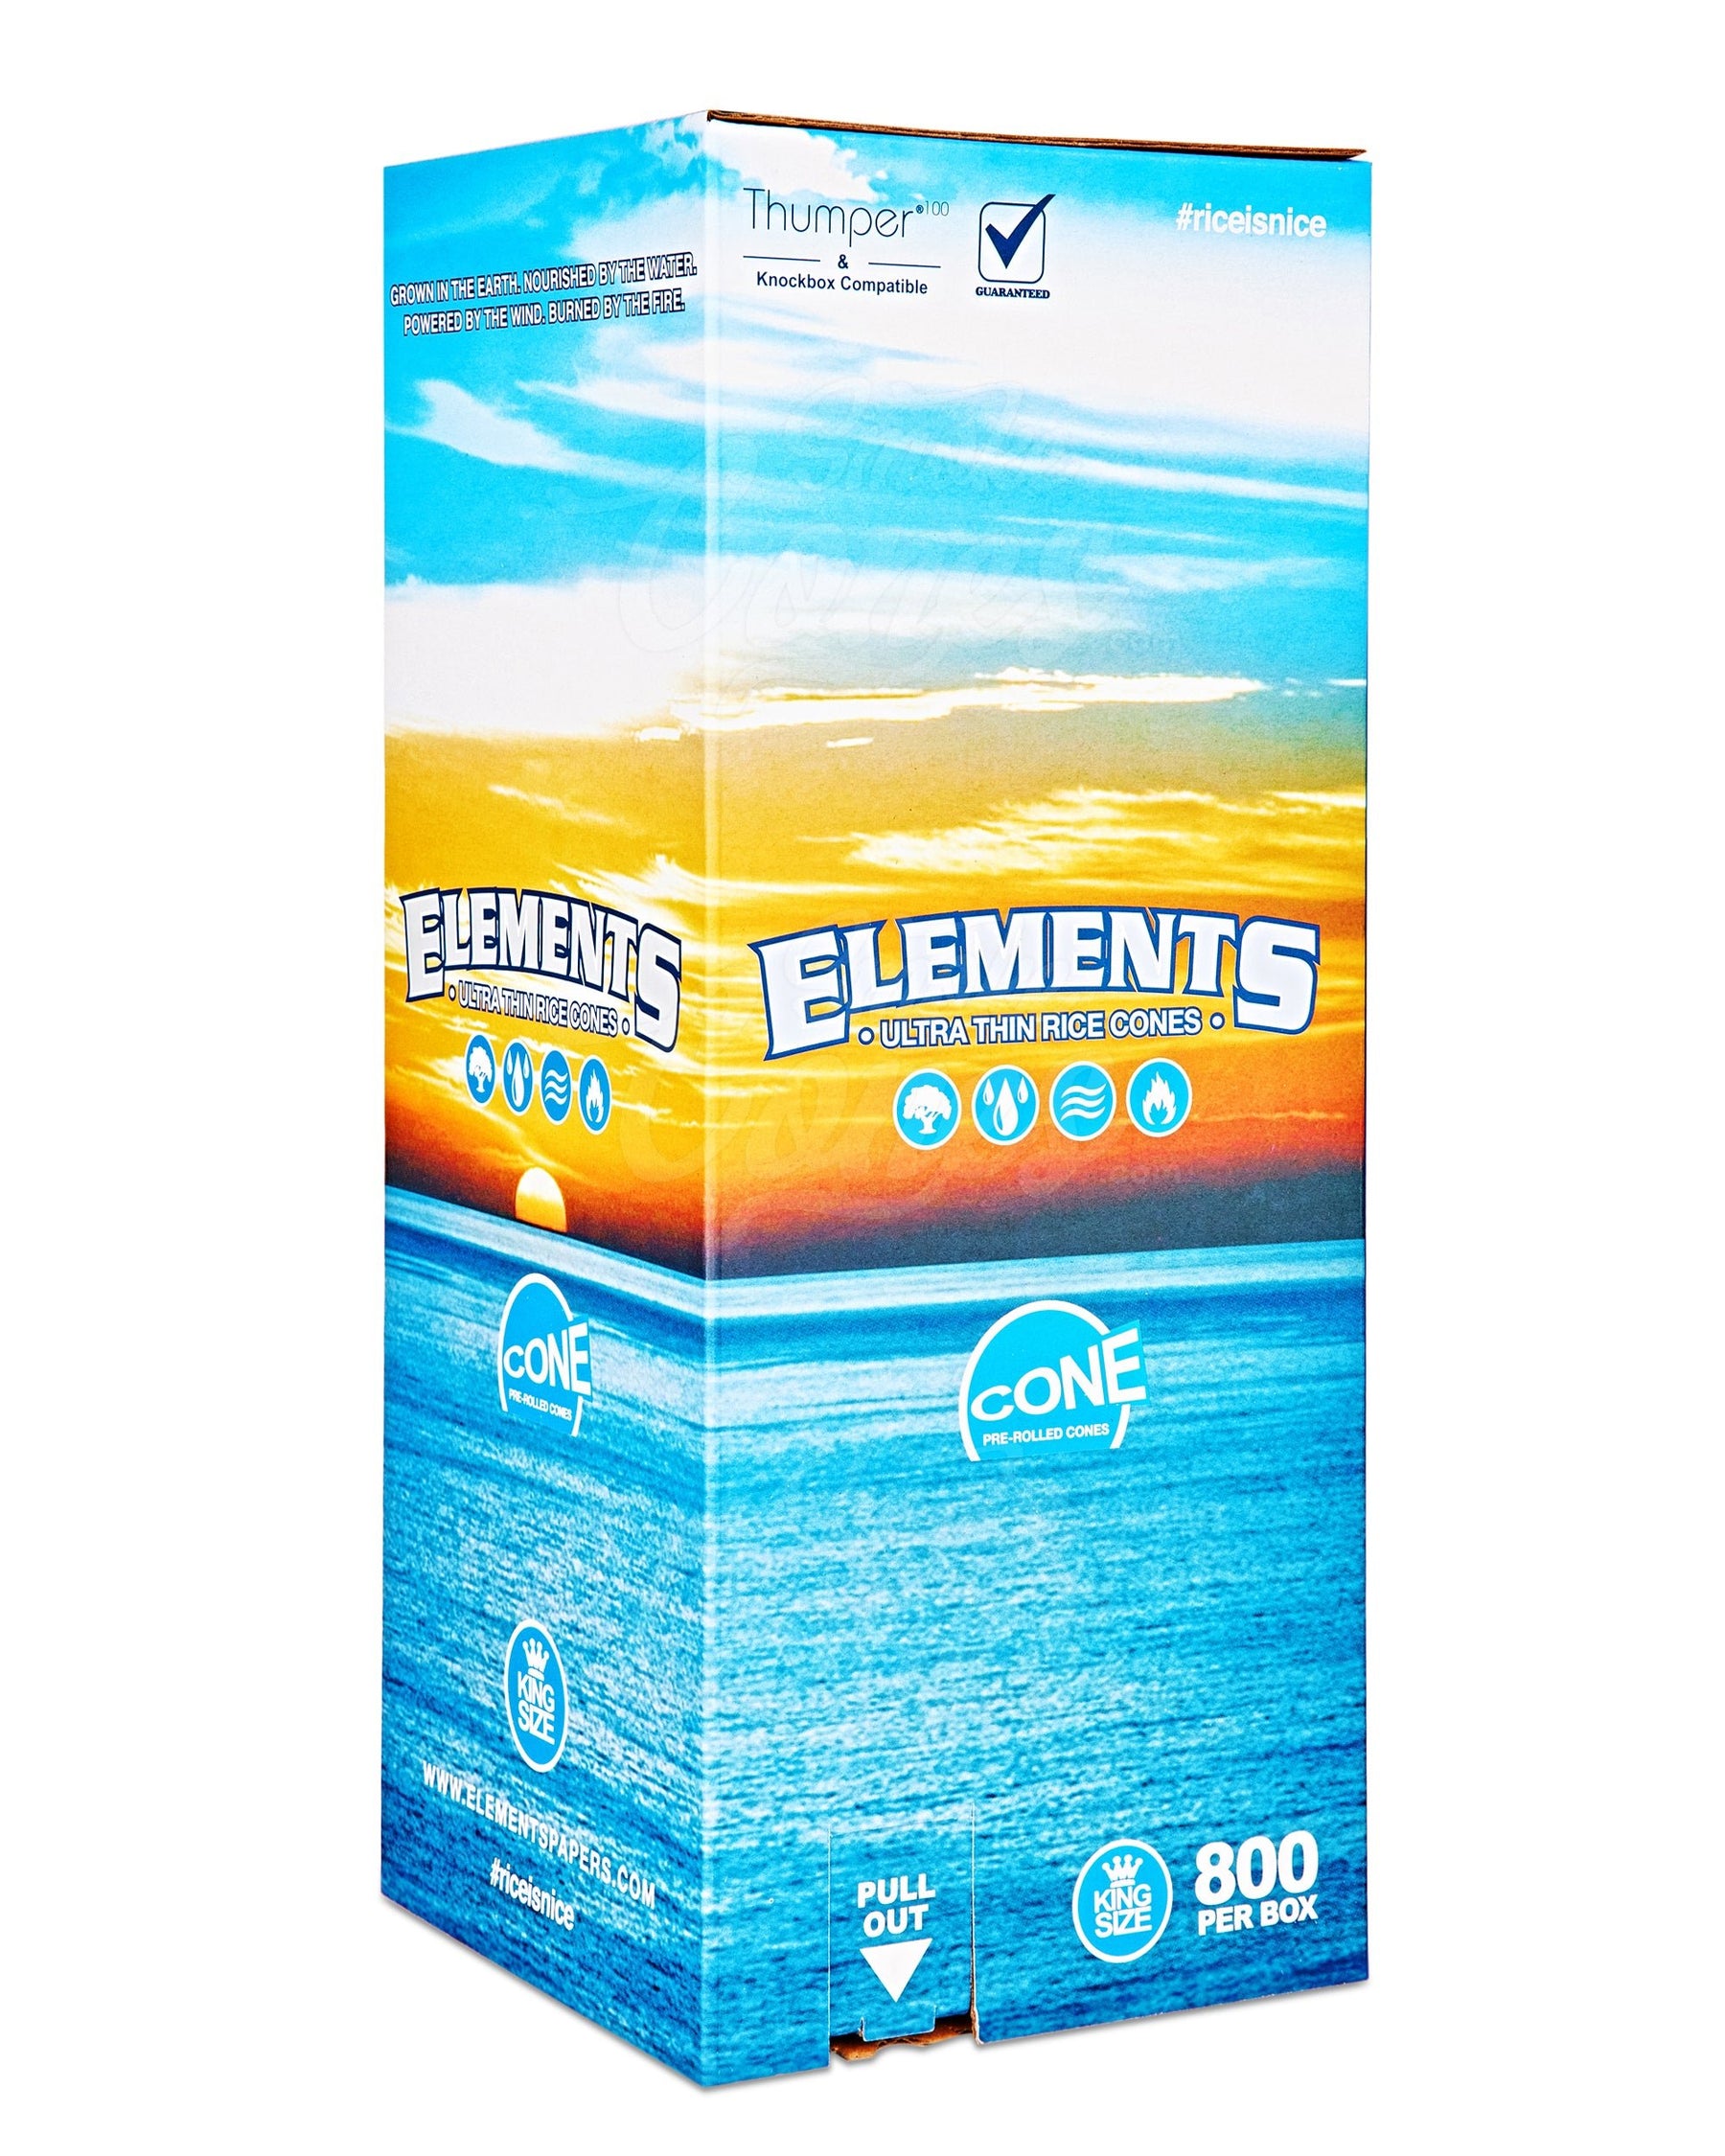 Elements 109mm King Sized Pre Rolled Ultra Thin Paper Rice Cones 800/Box - 1